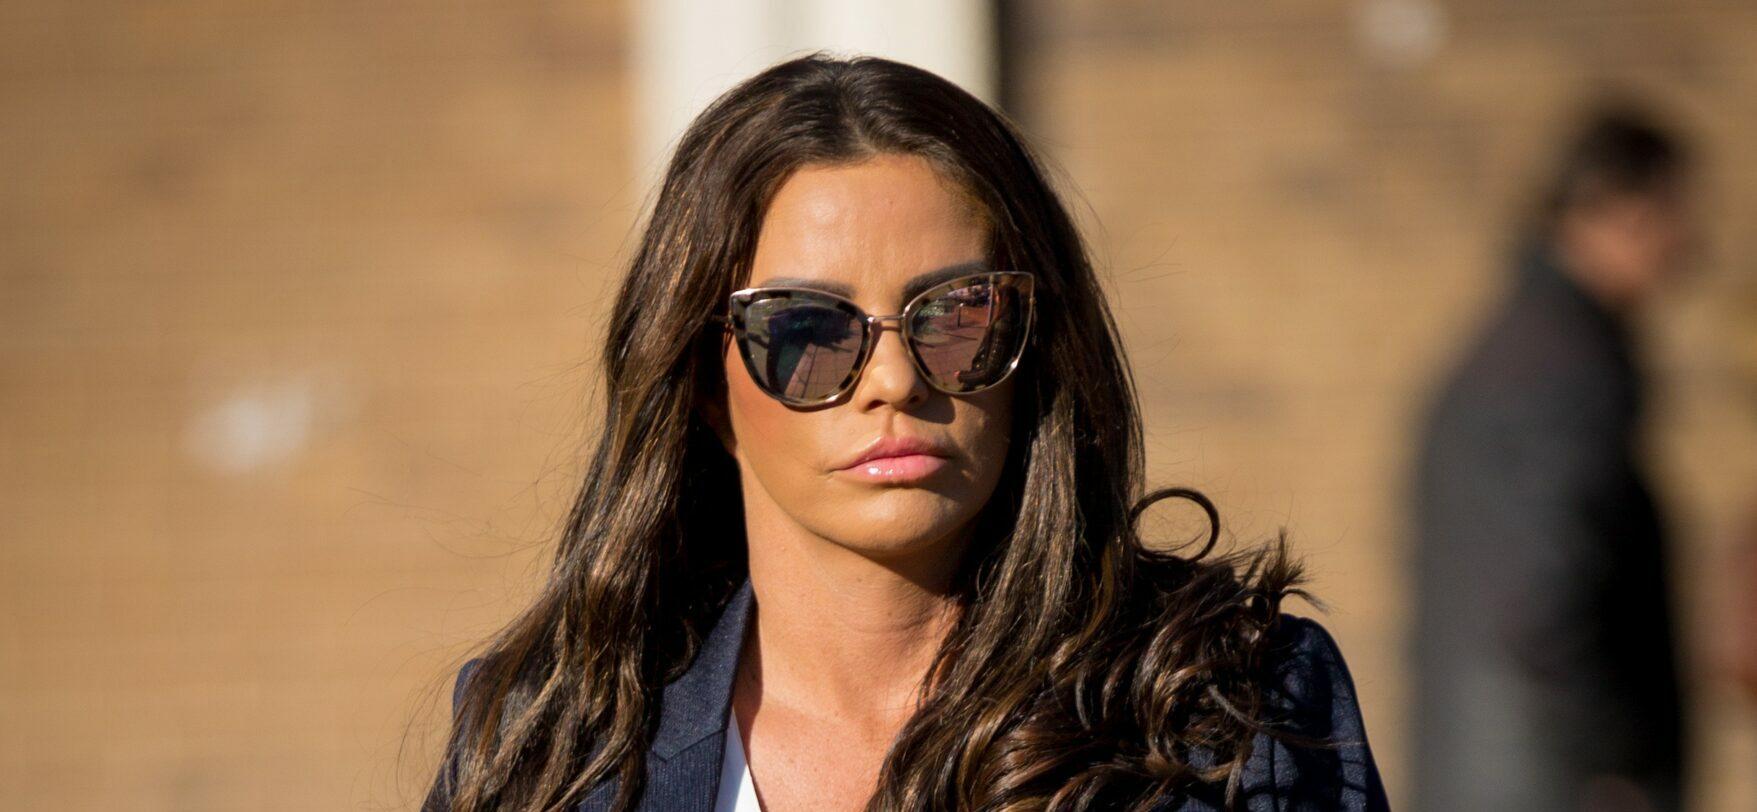 Katie Price Declares 2022 Year Of ‘NO DRAMA’ After Suspended Jail Sentence